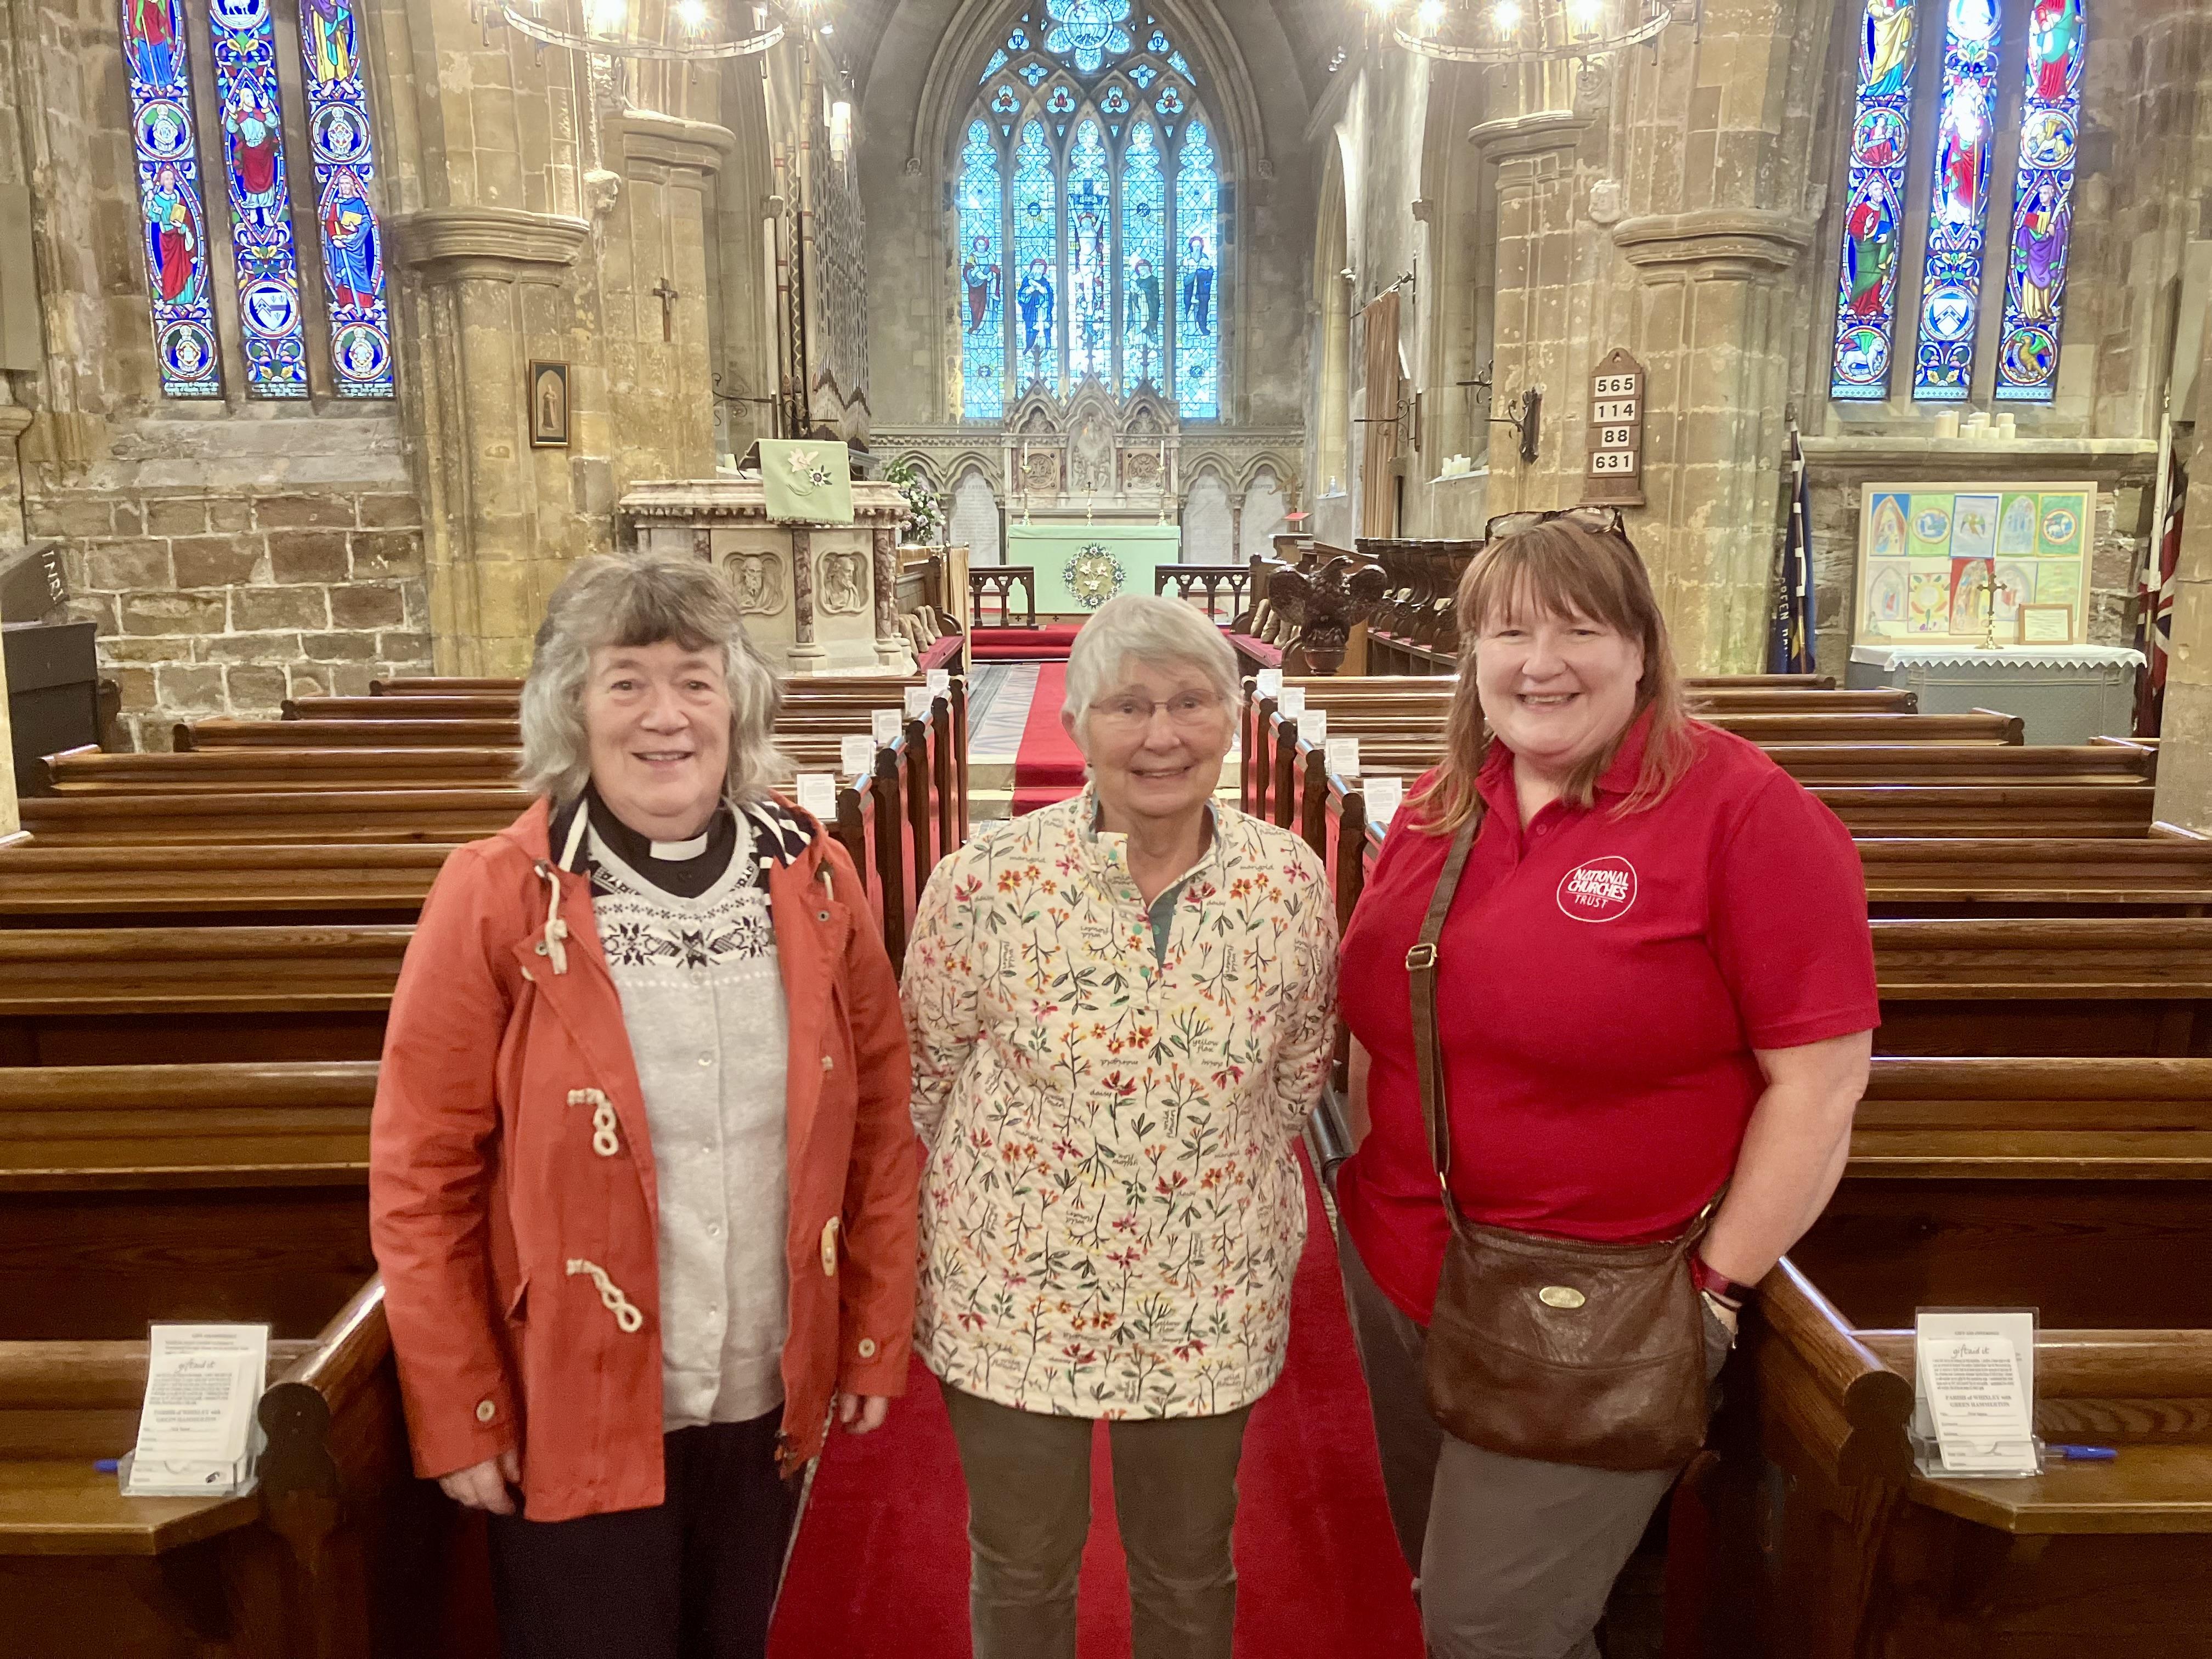 Sarah Crossland, the National Churches Trust's Engagement Manager (right) at the Church of the Ascension in Whixley, Yorkshire, with Revd Joan Roper and Churchwarden and gorgeous cake maker Enid Fisher (centre)